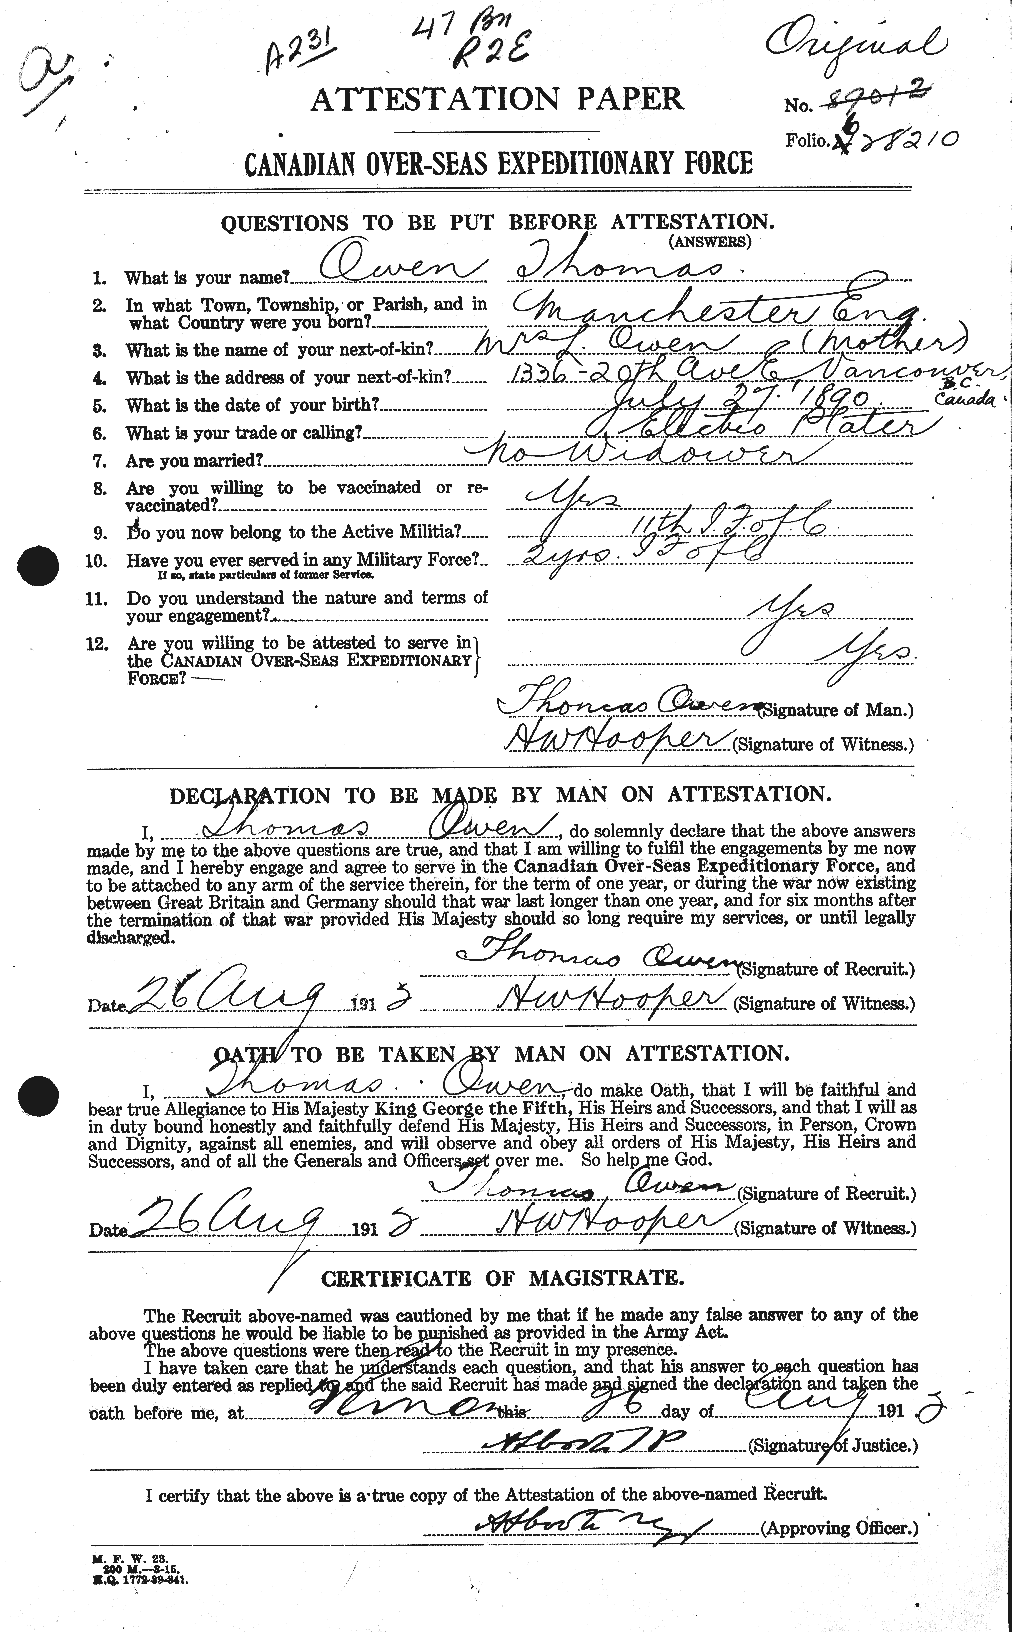 Personnel Records of the First World War - CEF 561387a